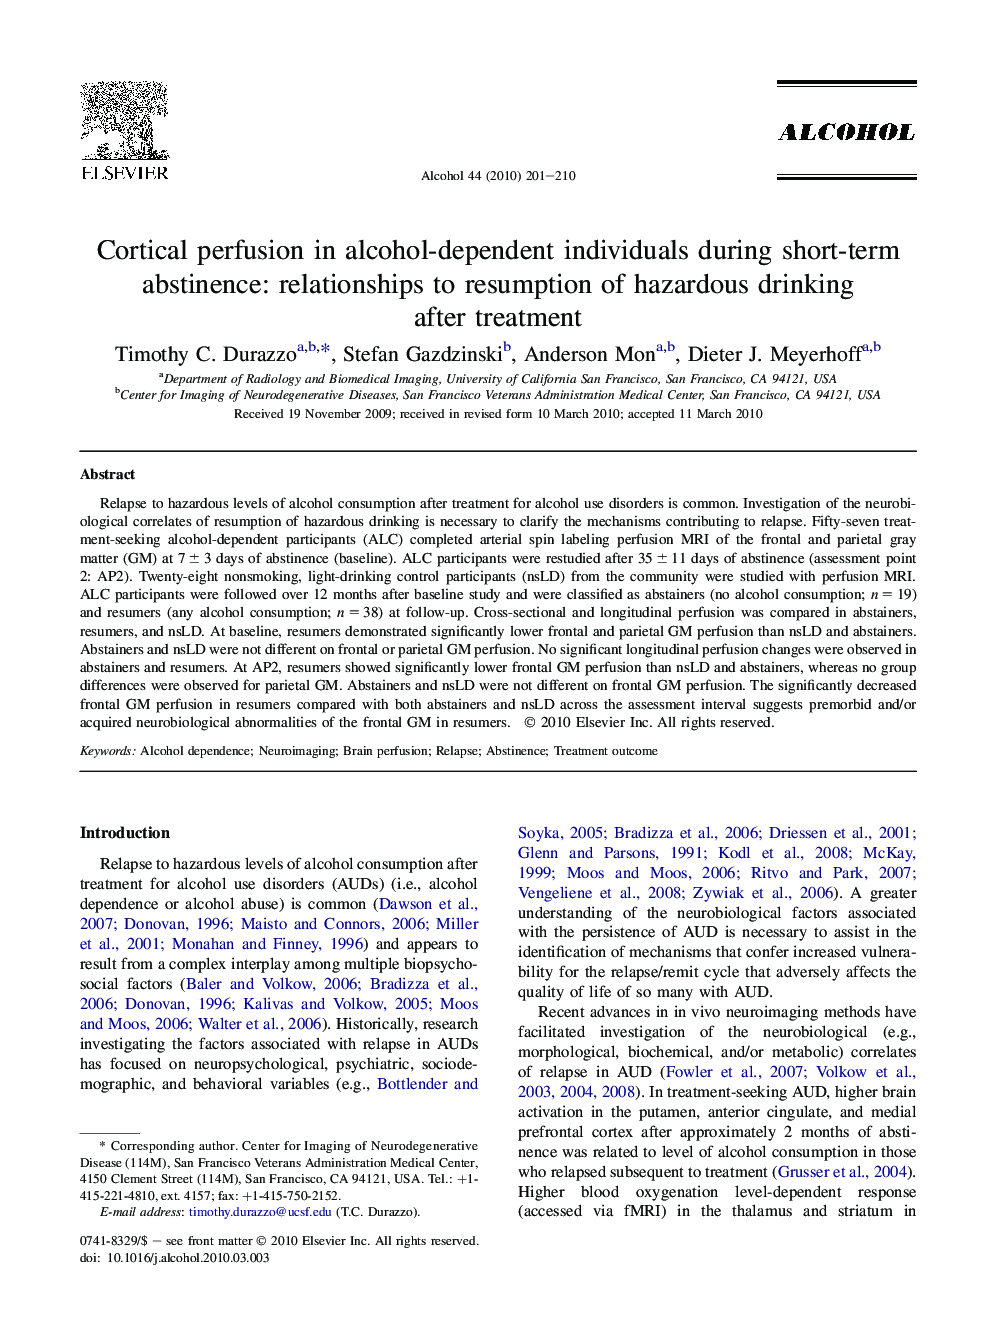 Cortical perfusion in alcohol-dependent individuals during short-term abstinence: relationships to resumption of hazardous drinking after treatment